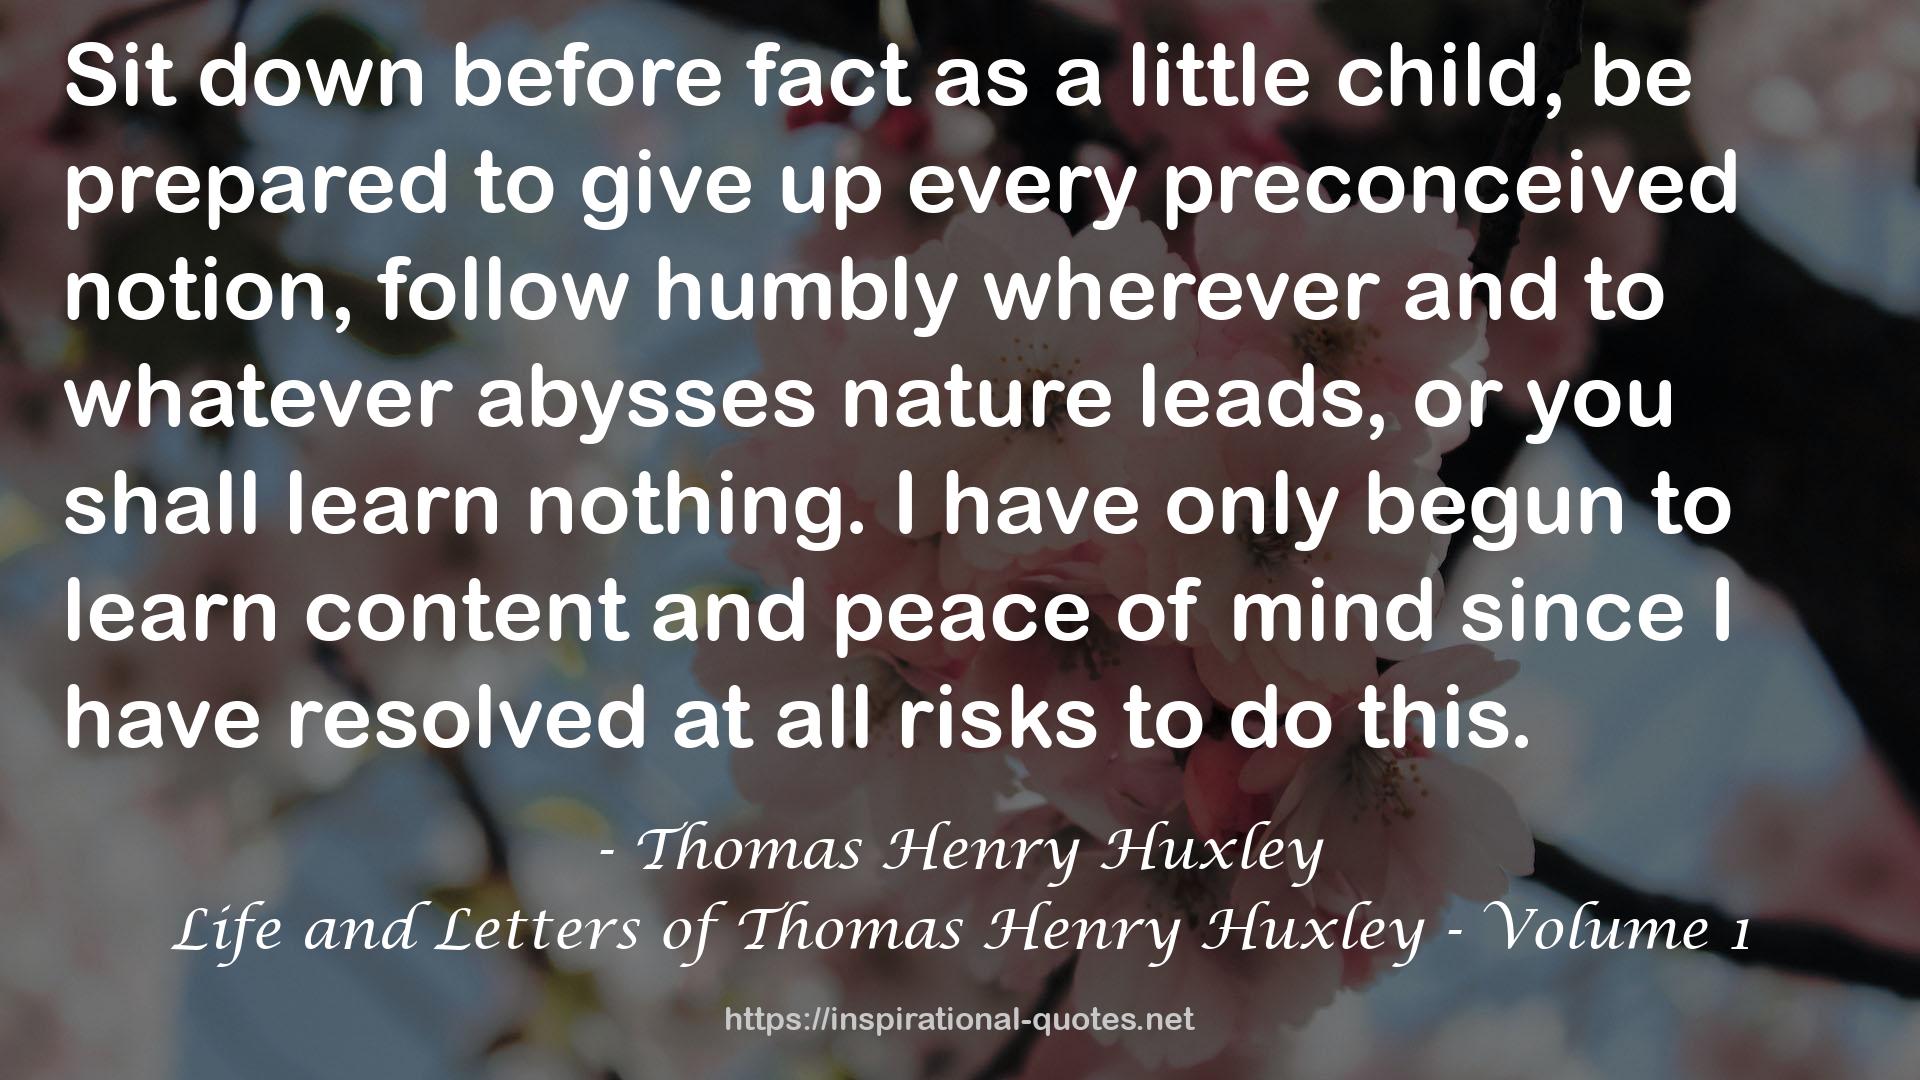 Life and Letters of Thomas Henry Huxley - Volume 1 QUOTES